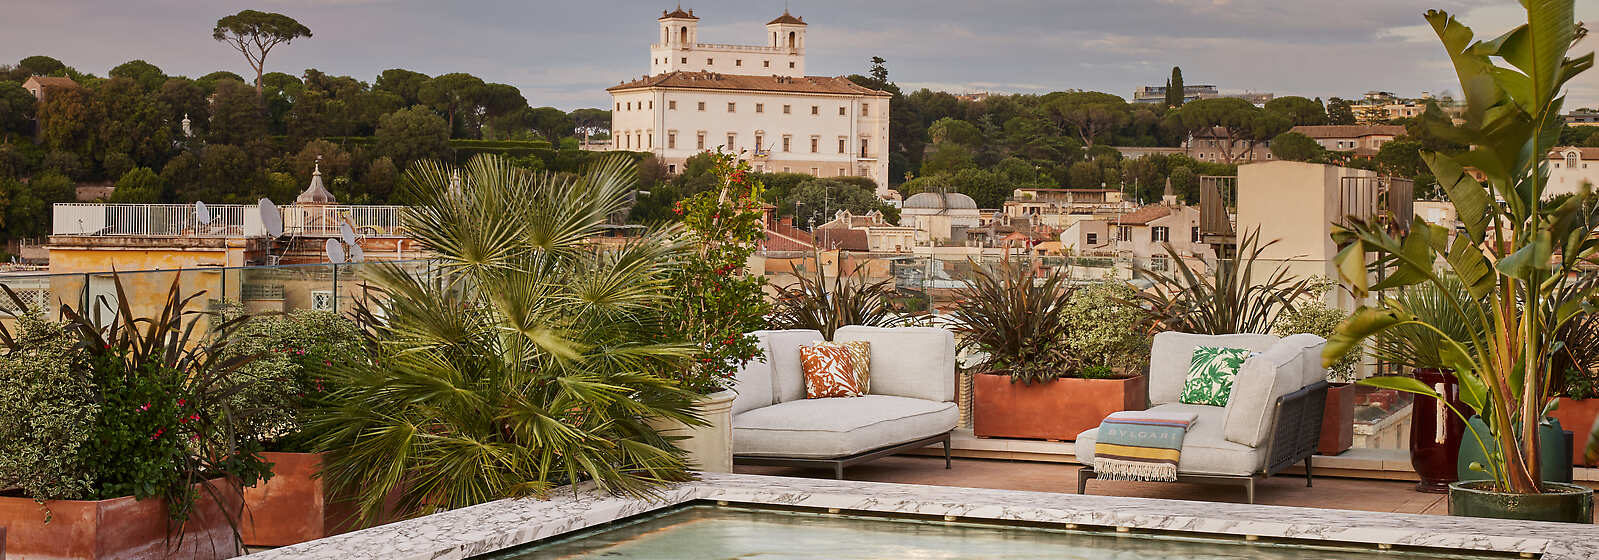 La Terrazza is the Hotel’s spectacular rooftop terrace, and home to sweeping views over all of Rome, from Villa Medici and Trinità dei Monti